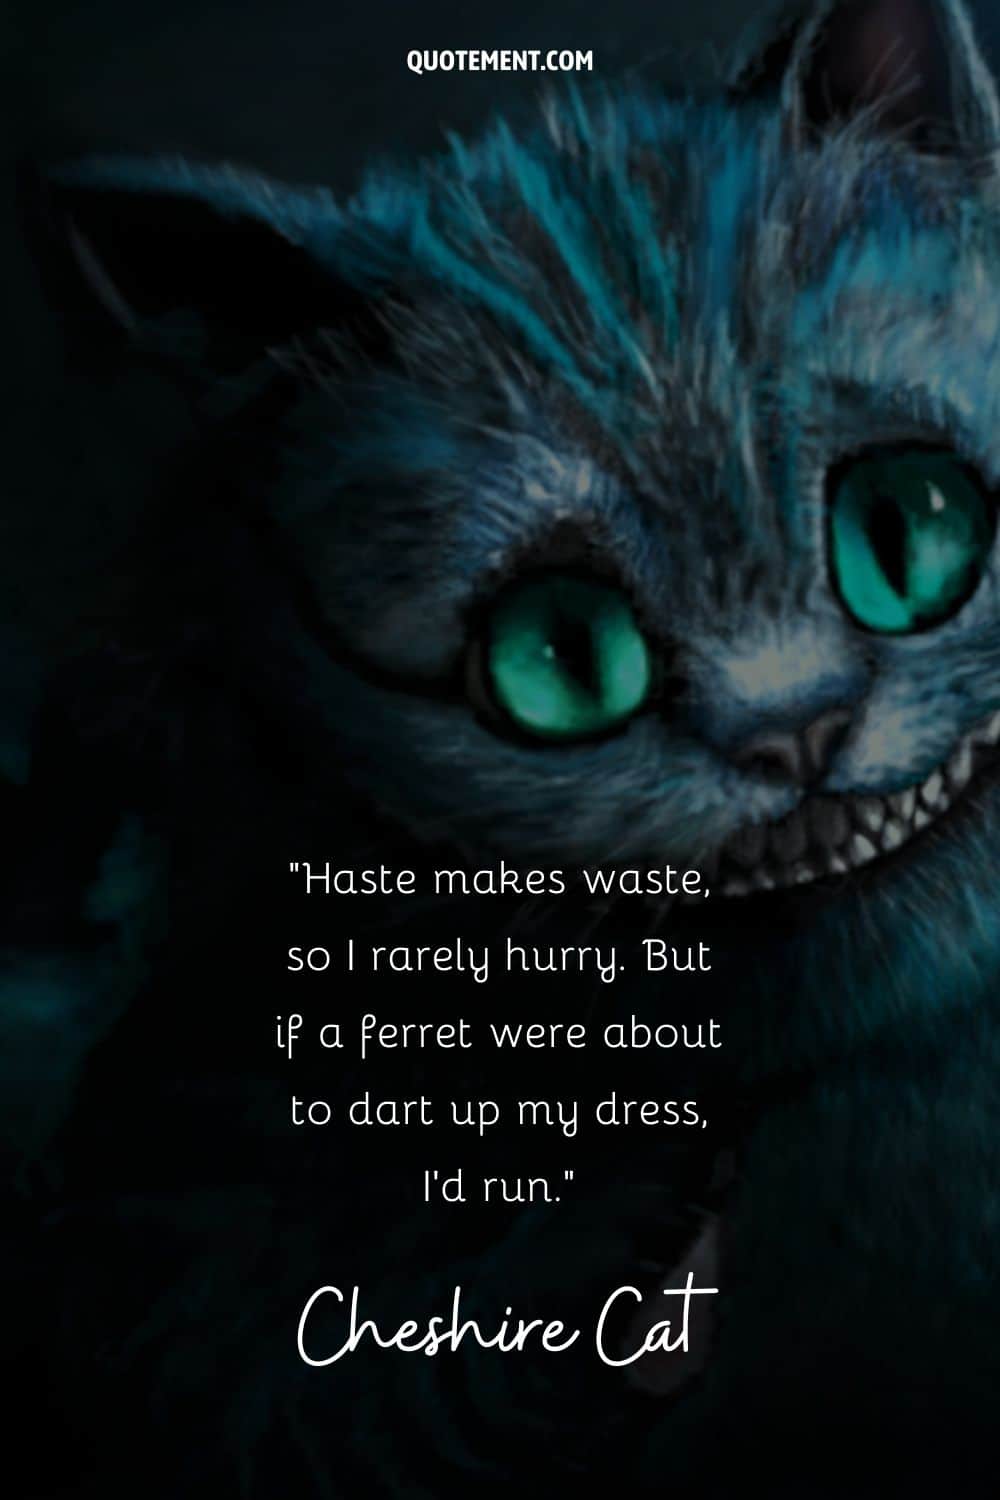 Brilliant quote by the Cheshire Cat and its image in the background as well